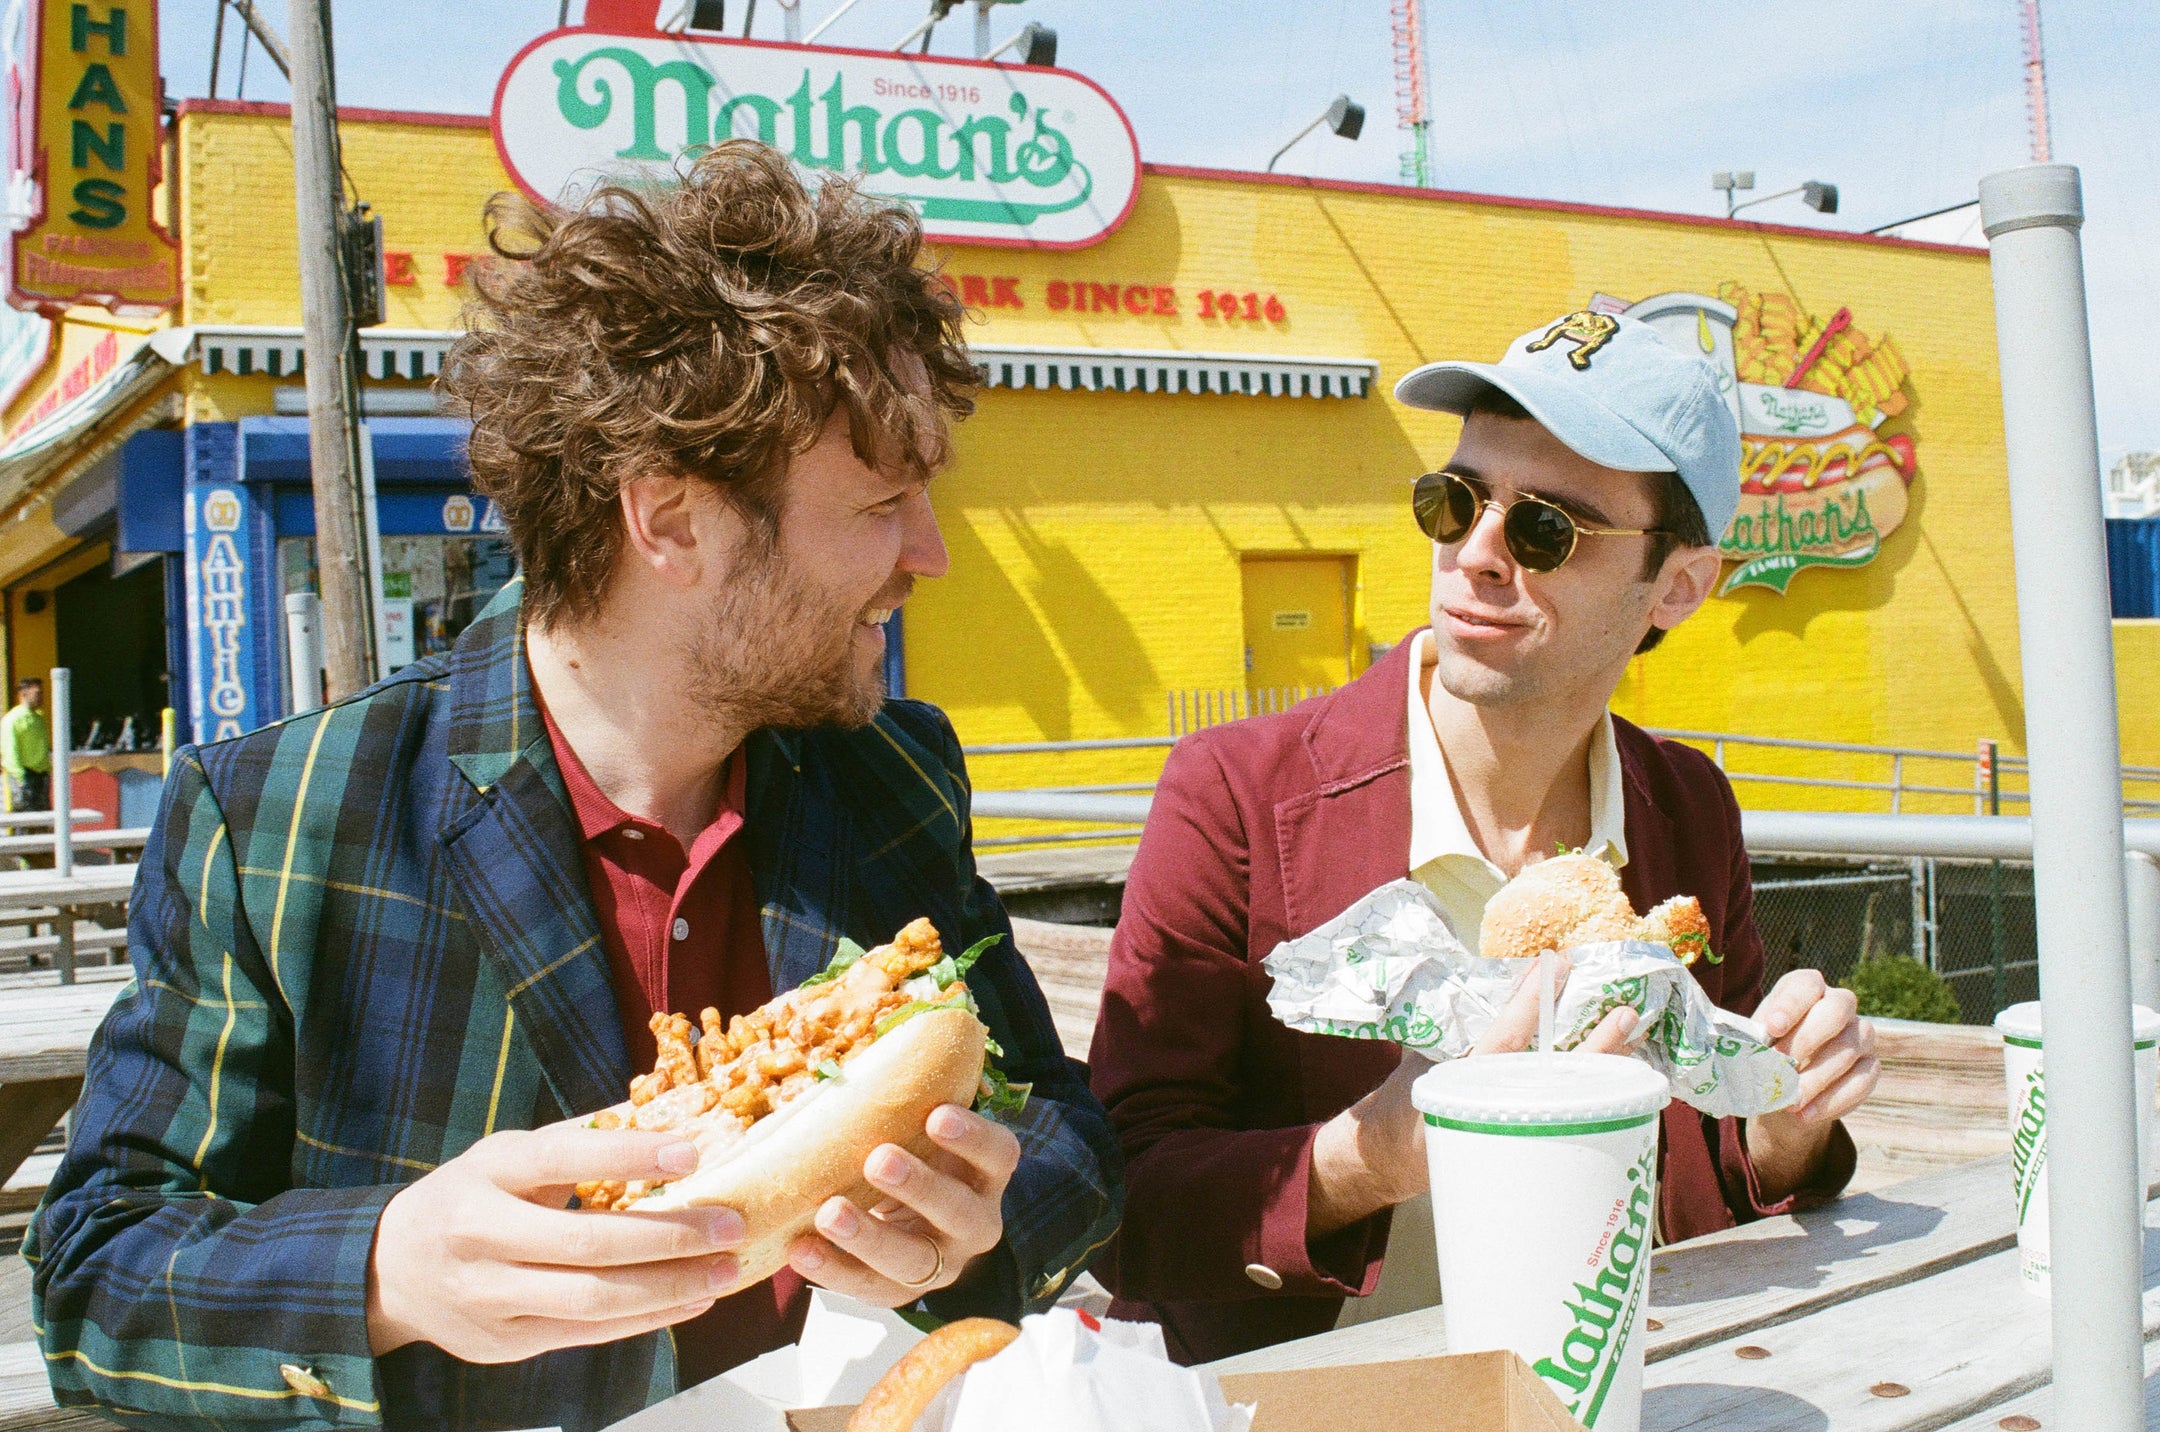 This is Ra Ra Riot (We went to Coney Island with Ra Ra Riot)